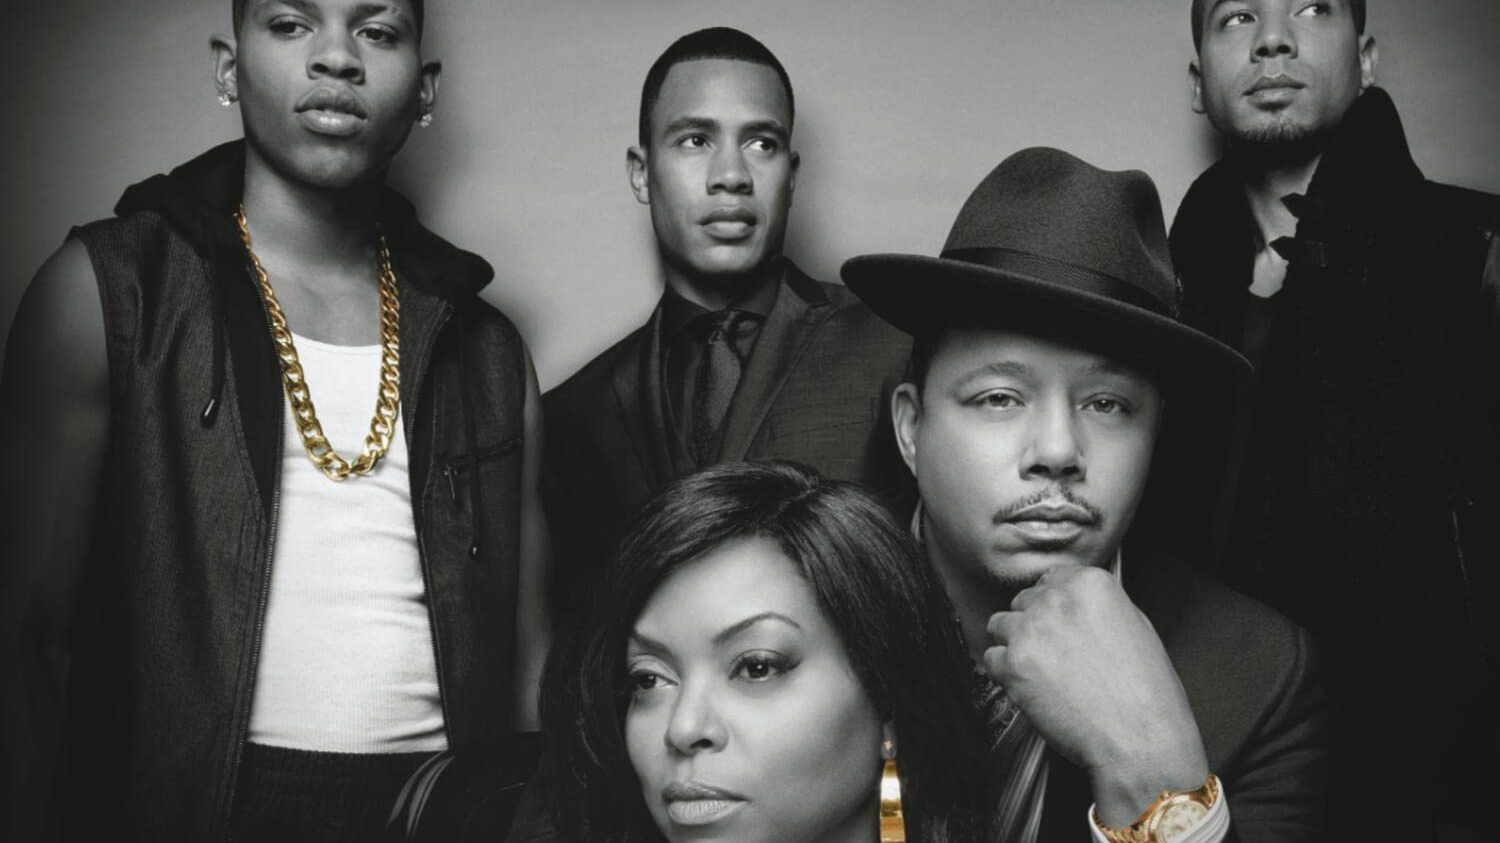 The Cast of “Empire” (ABC): Where Are These Black Actors Now?